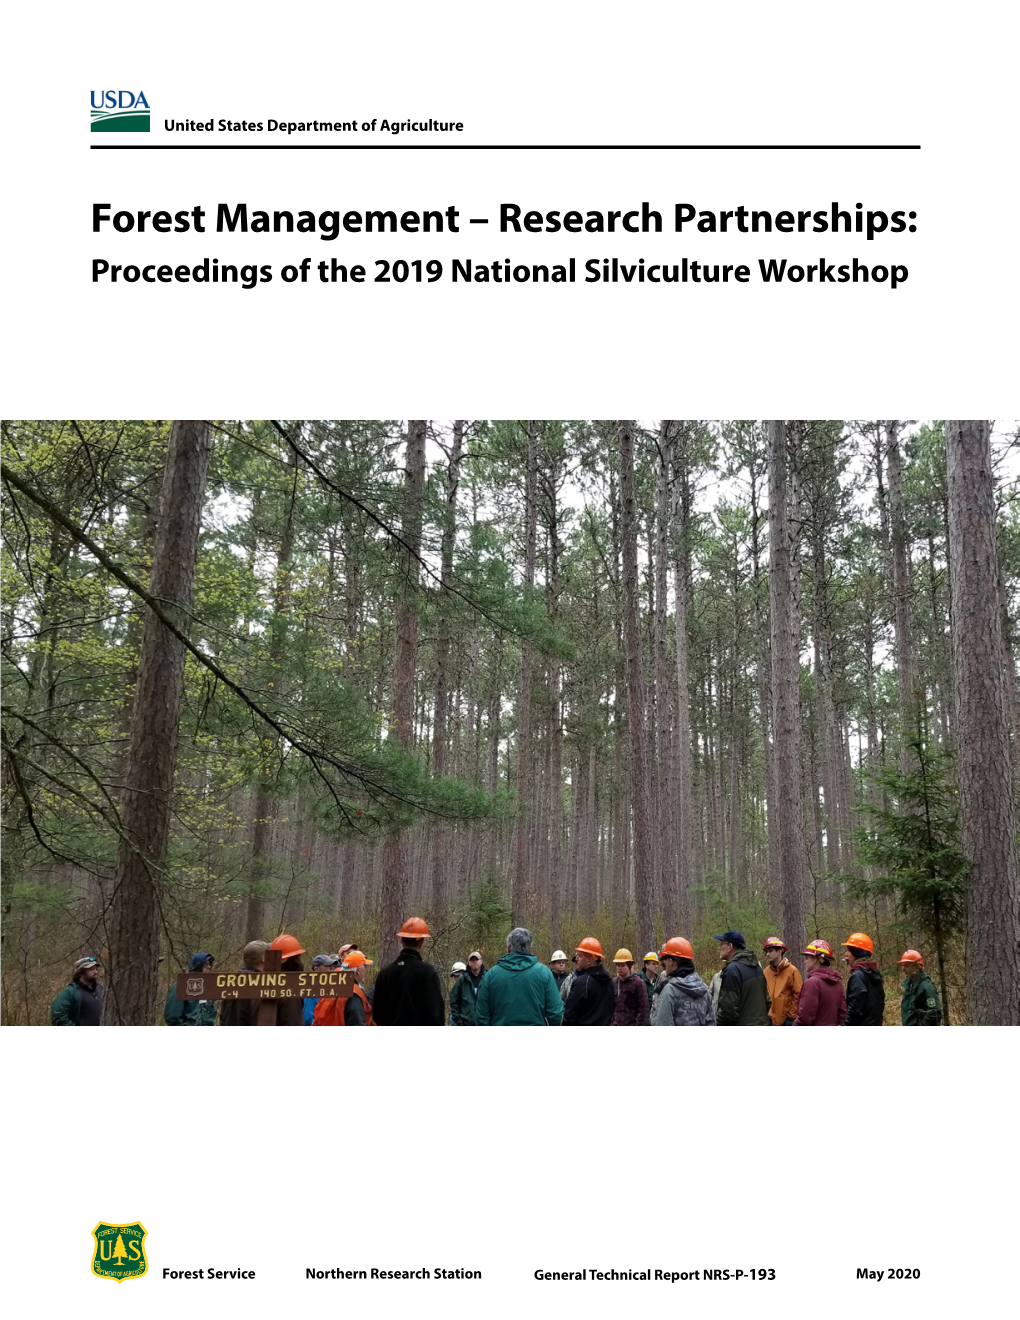 Forest Management – Research Partnerships: Proceedings of the 2019 National Silviculture Workshop